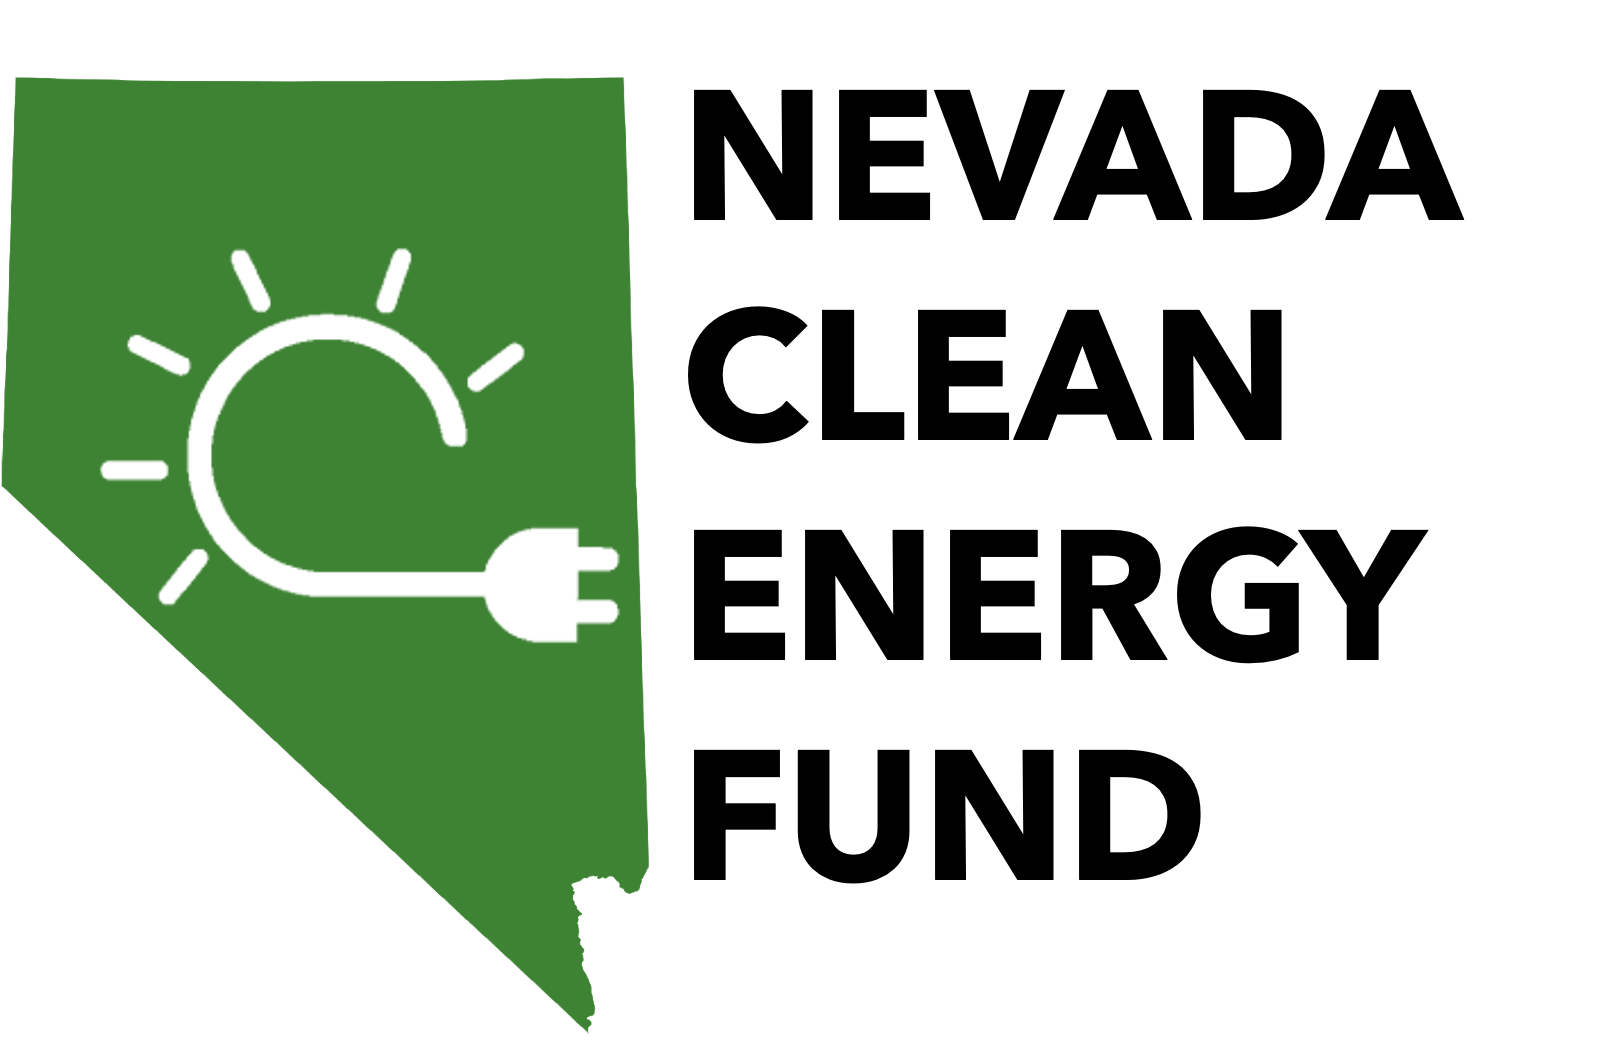 A green map of nevada with the words " nevada clean energy fund ".